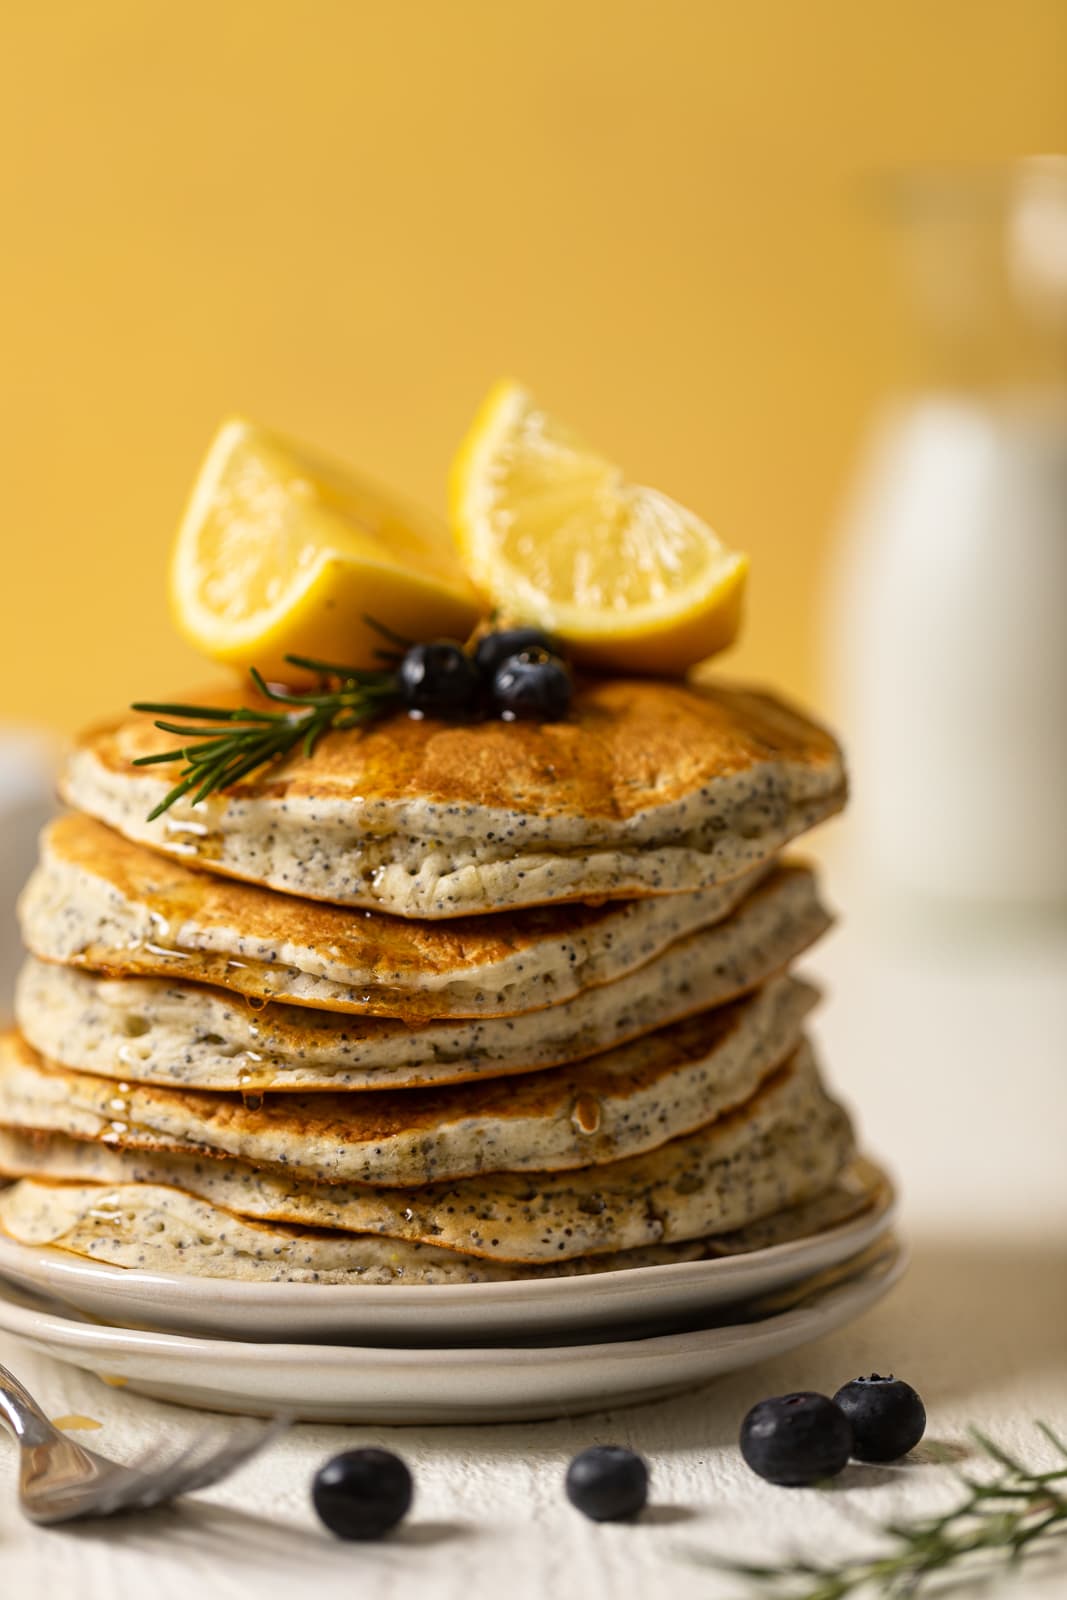 Stack of Vegan Lemon Poppyseed Pancakes topped with lemon wedges, blueberries, and a sprig of rosemary